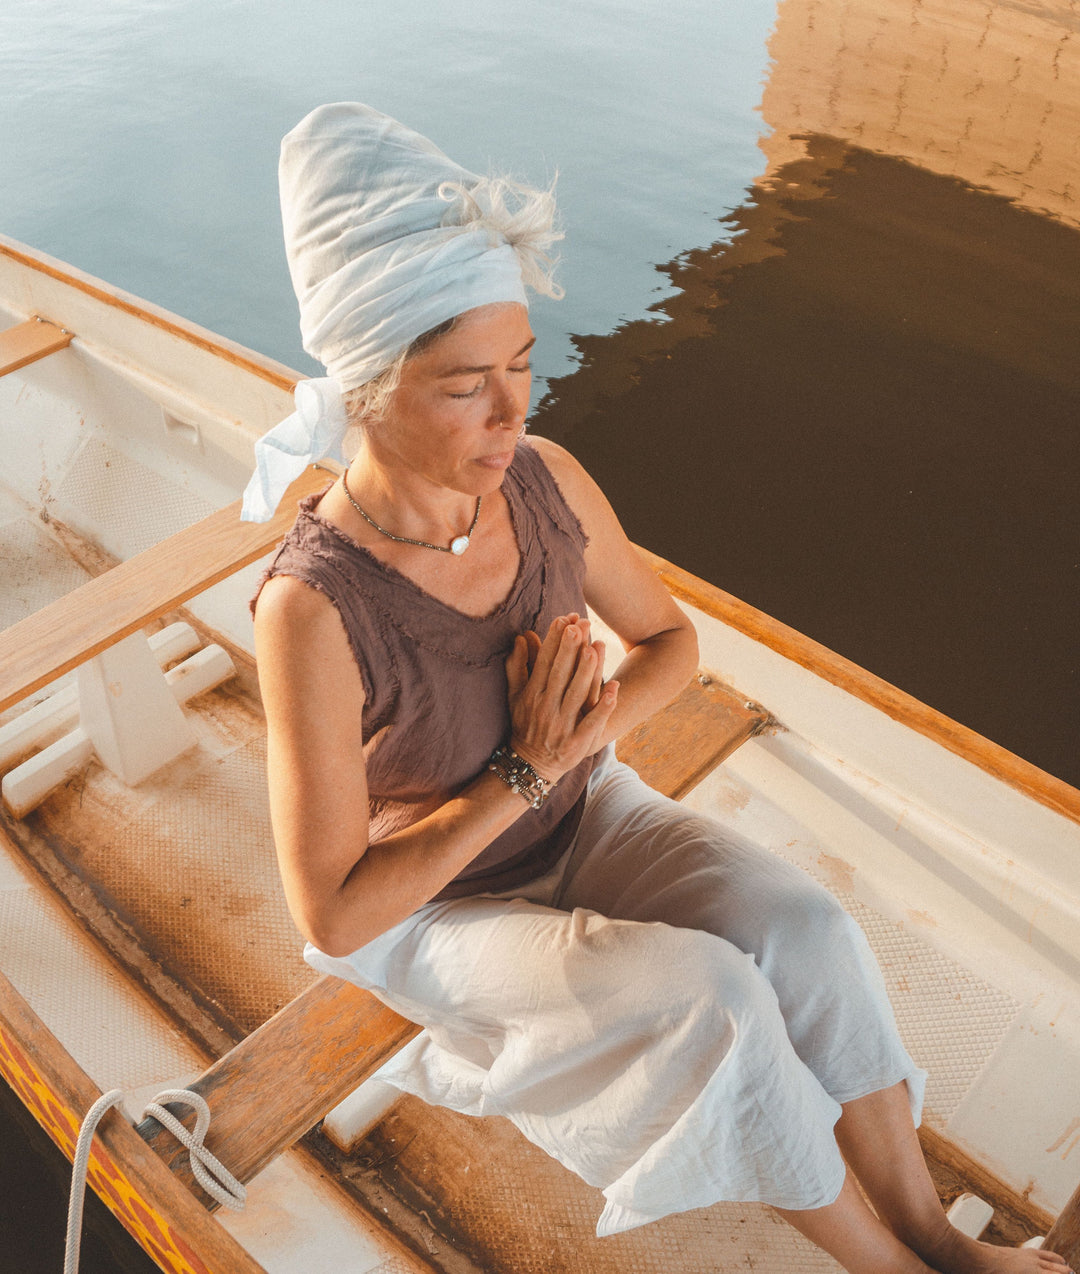 Woman sits in boat wearing brown top, white pants and white head wrap. Her hands are in prayer position.